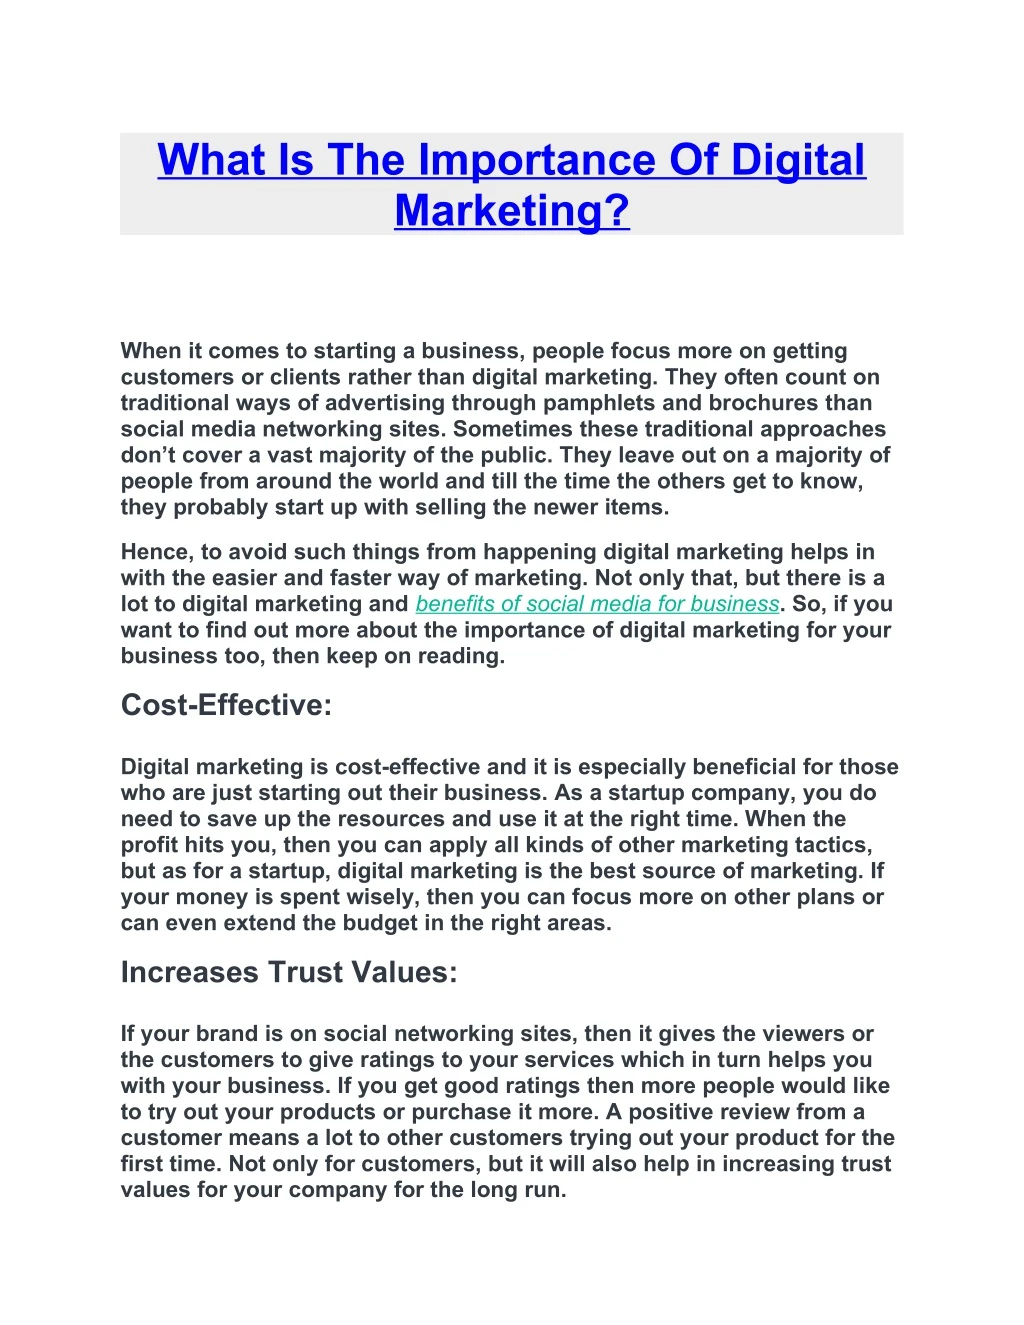 what is the importance of digital marketing